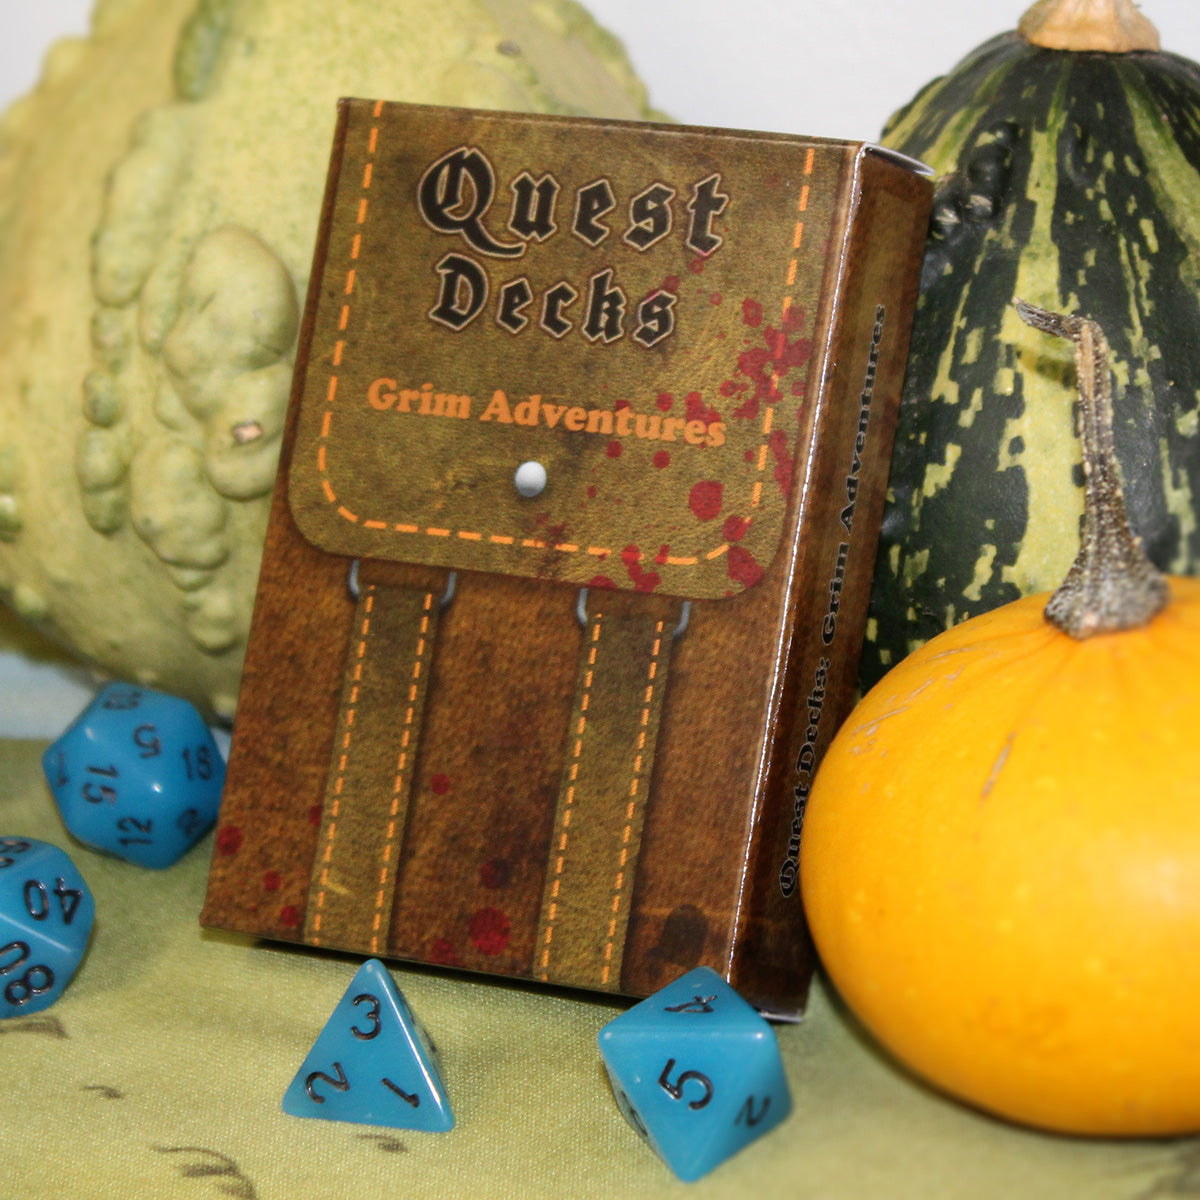 Grim Adventurers side-quest for dungeons and dragons.